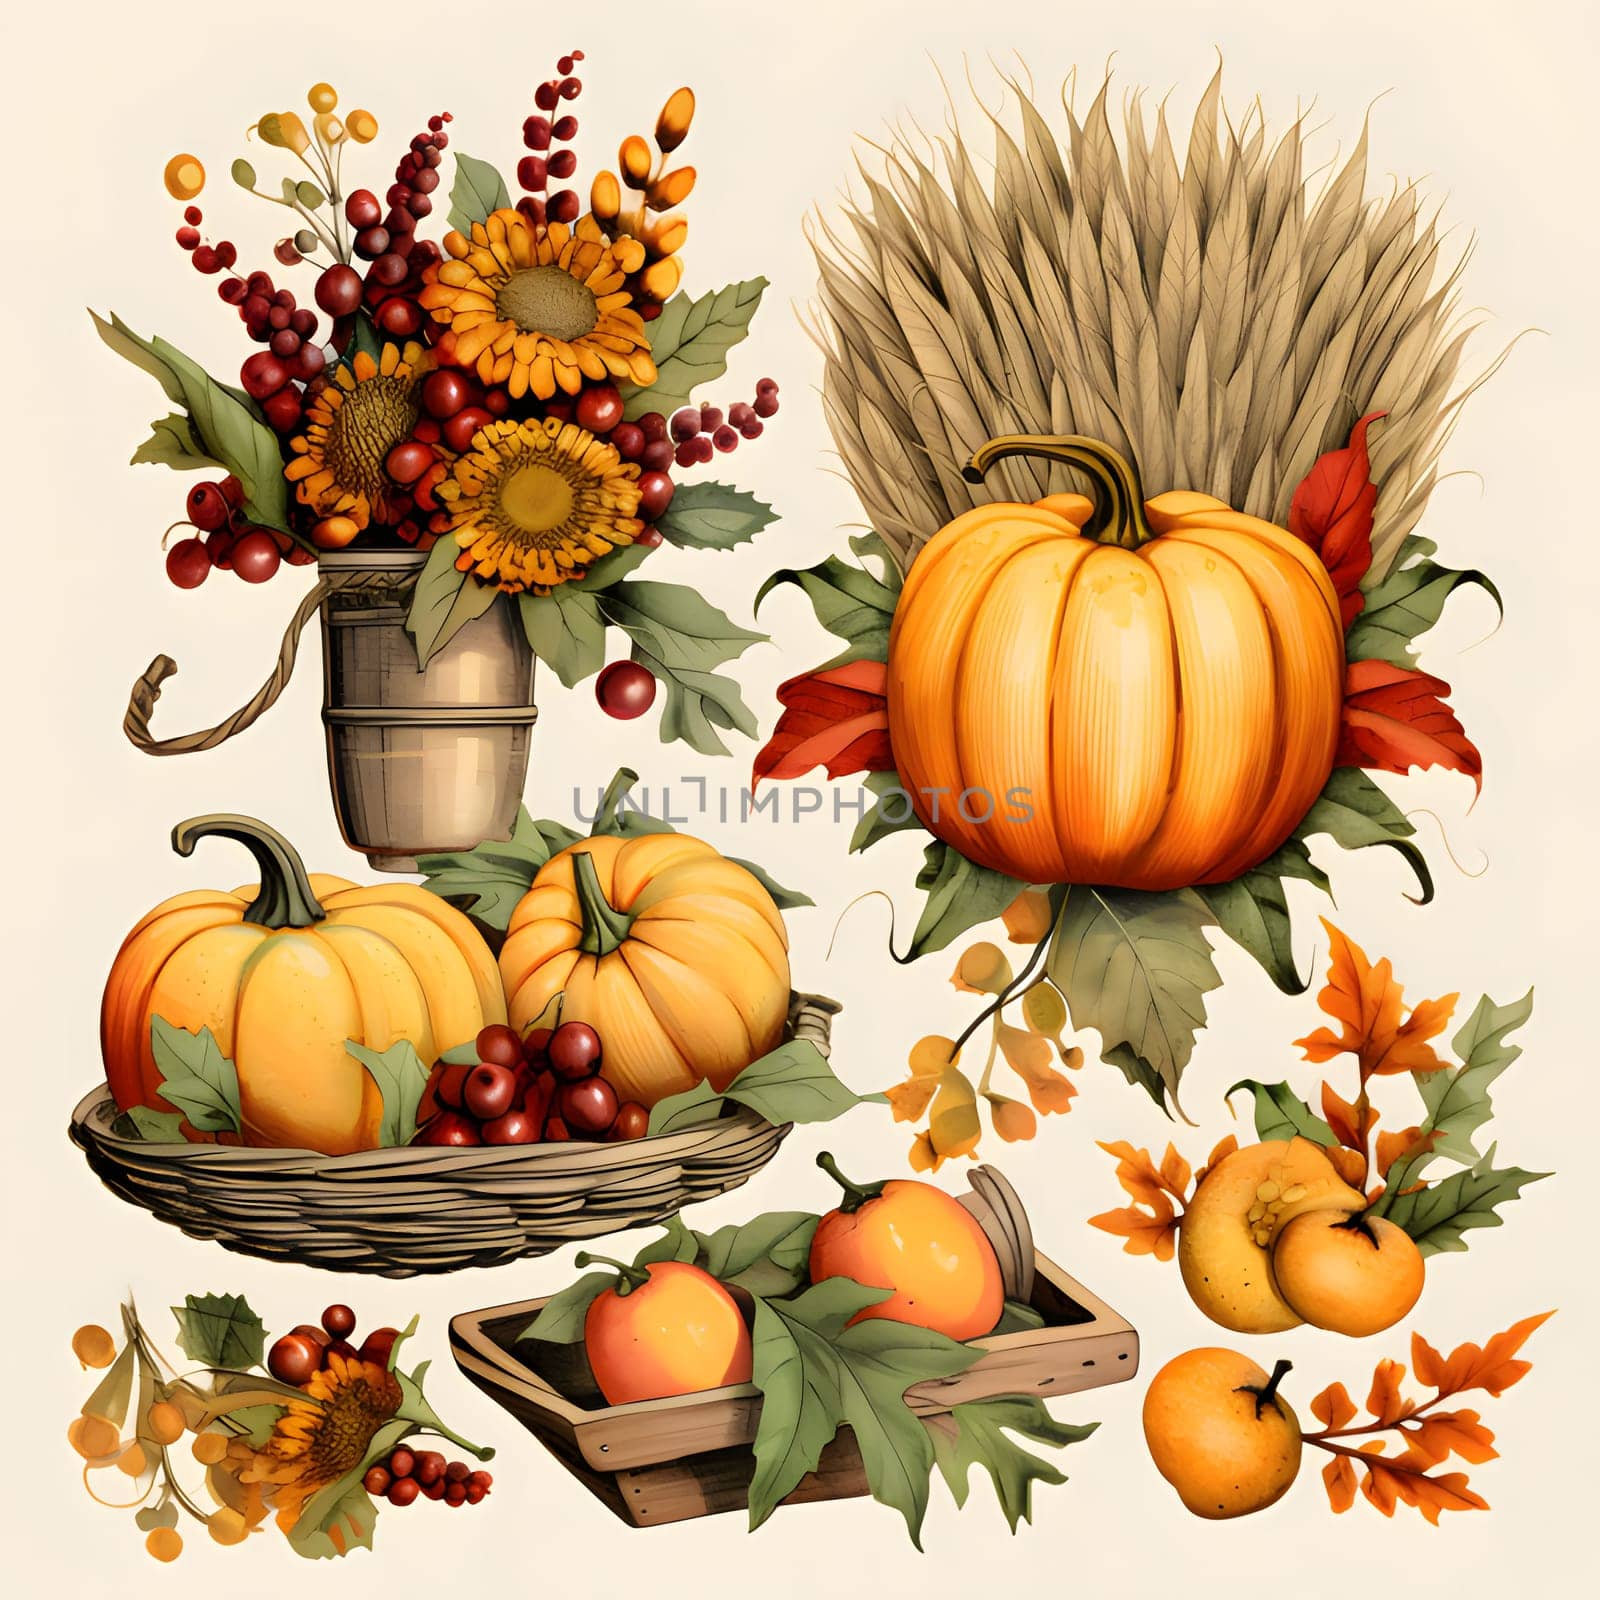 Stickers related to harvest, vegetables, fruits. Pumpkin as a dish of thanksgiving for the harvest, picture on a white isolated background. Atmosphere of joy and celebration.